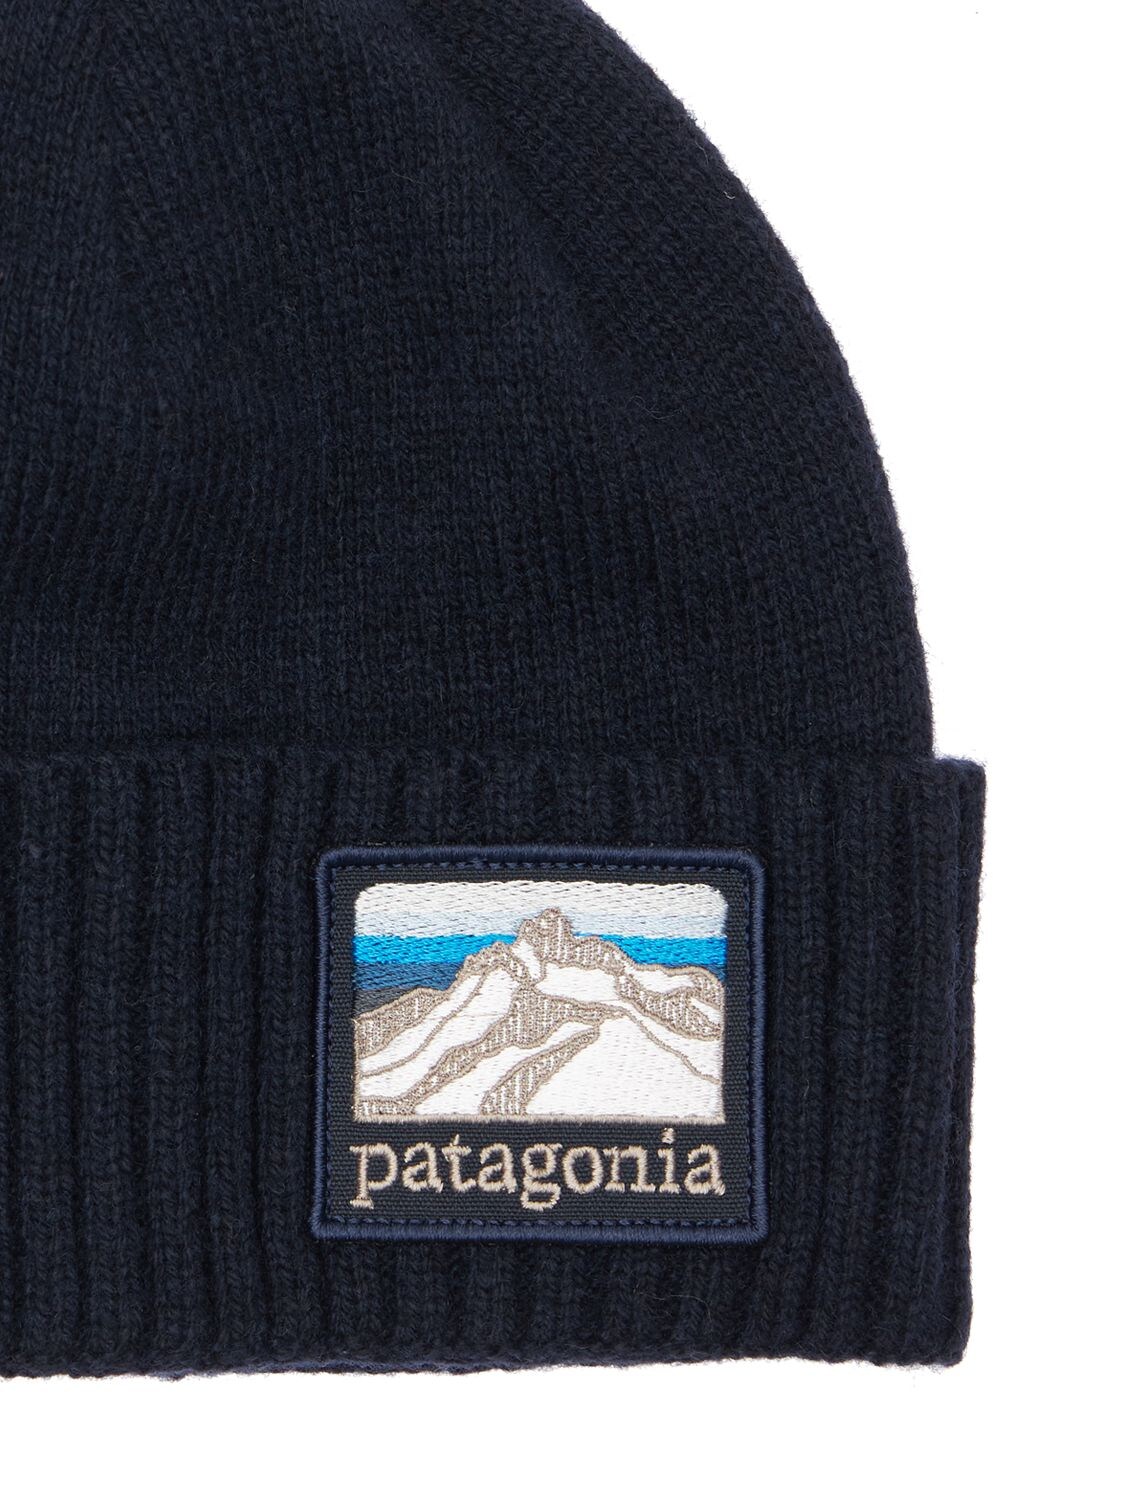 Patagonia Brodeo Rolled Beanie